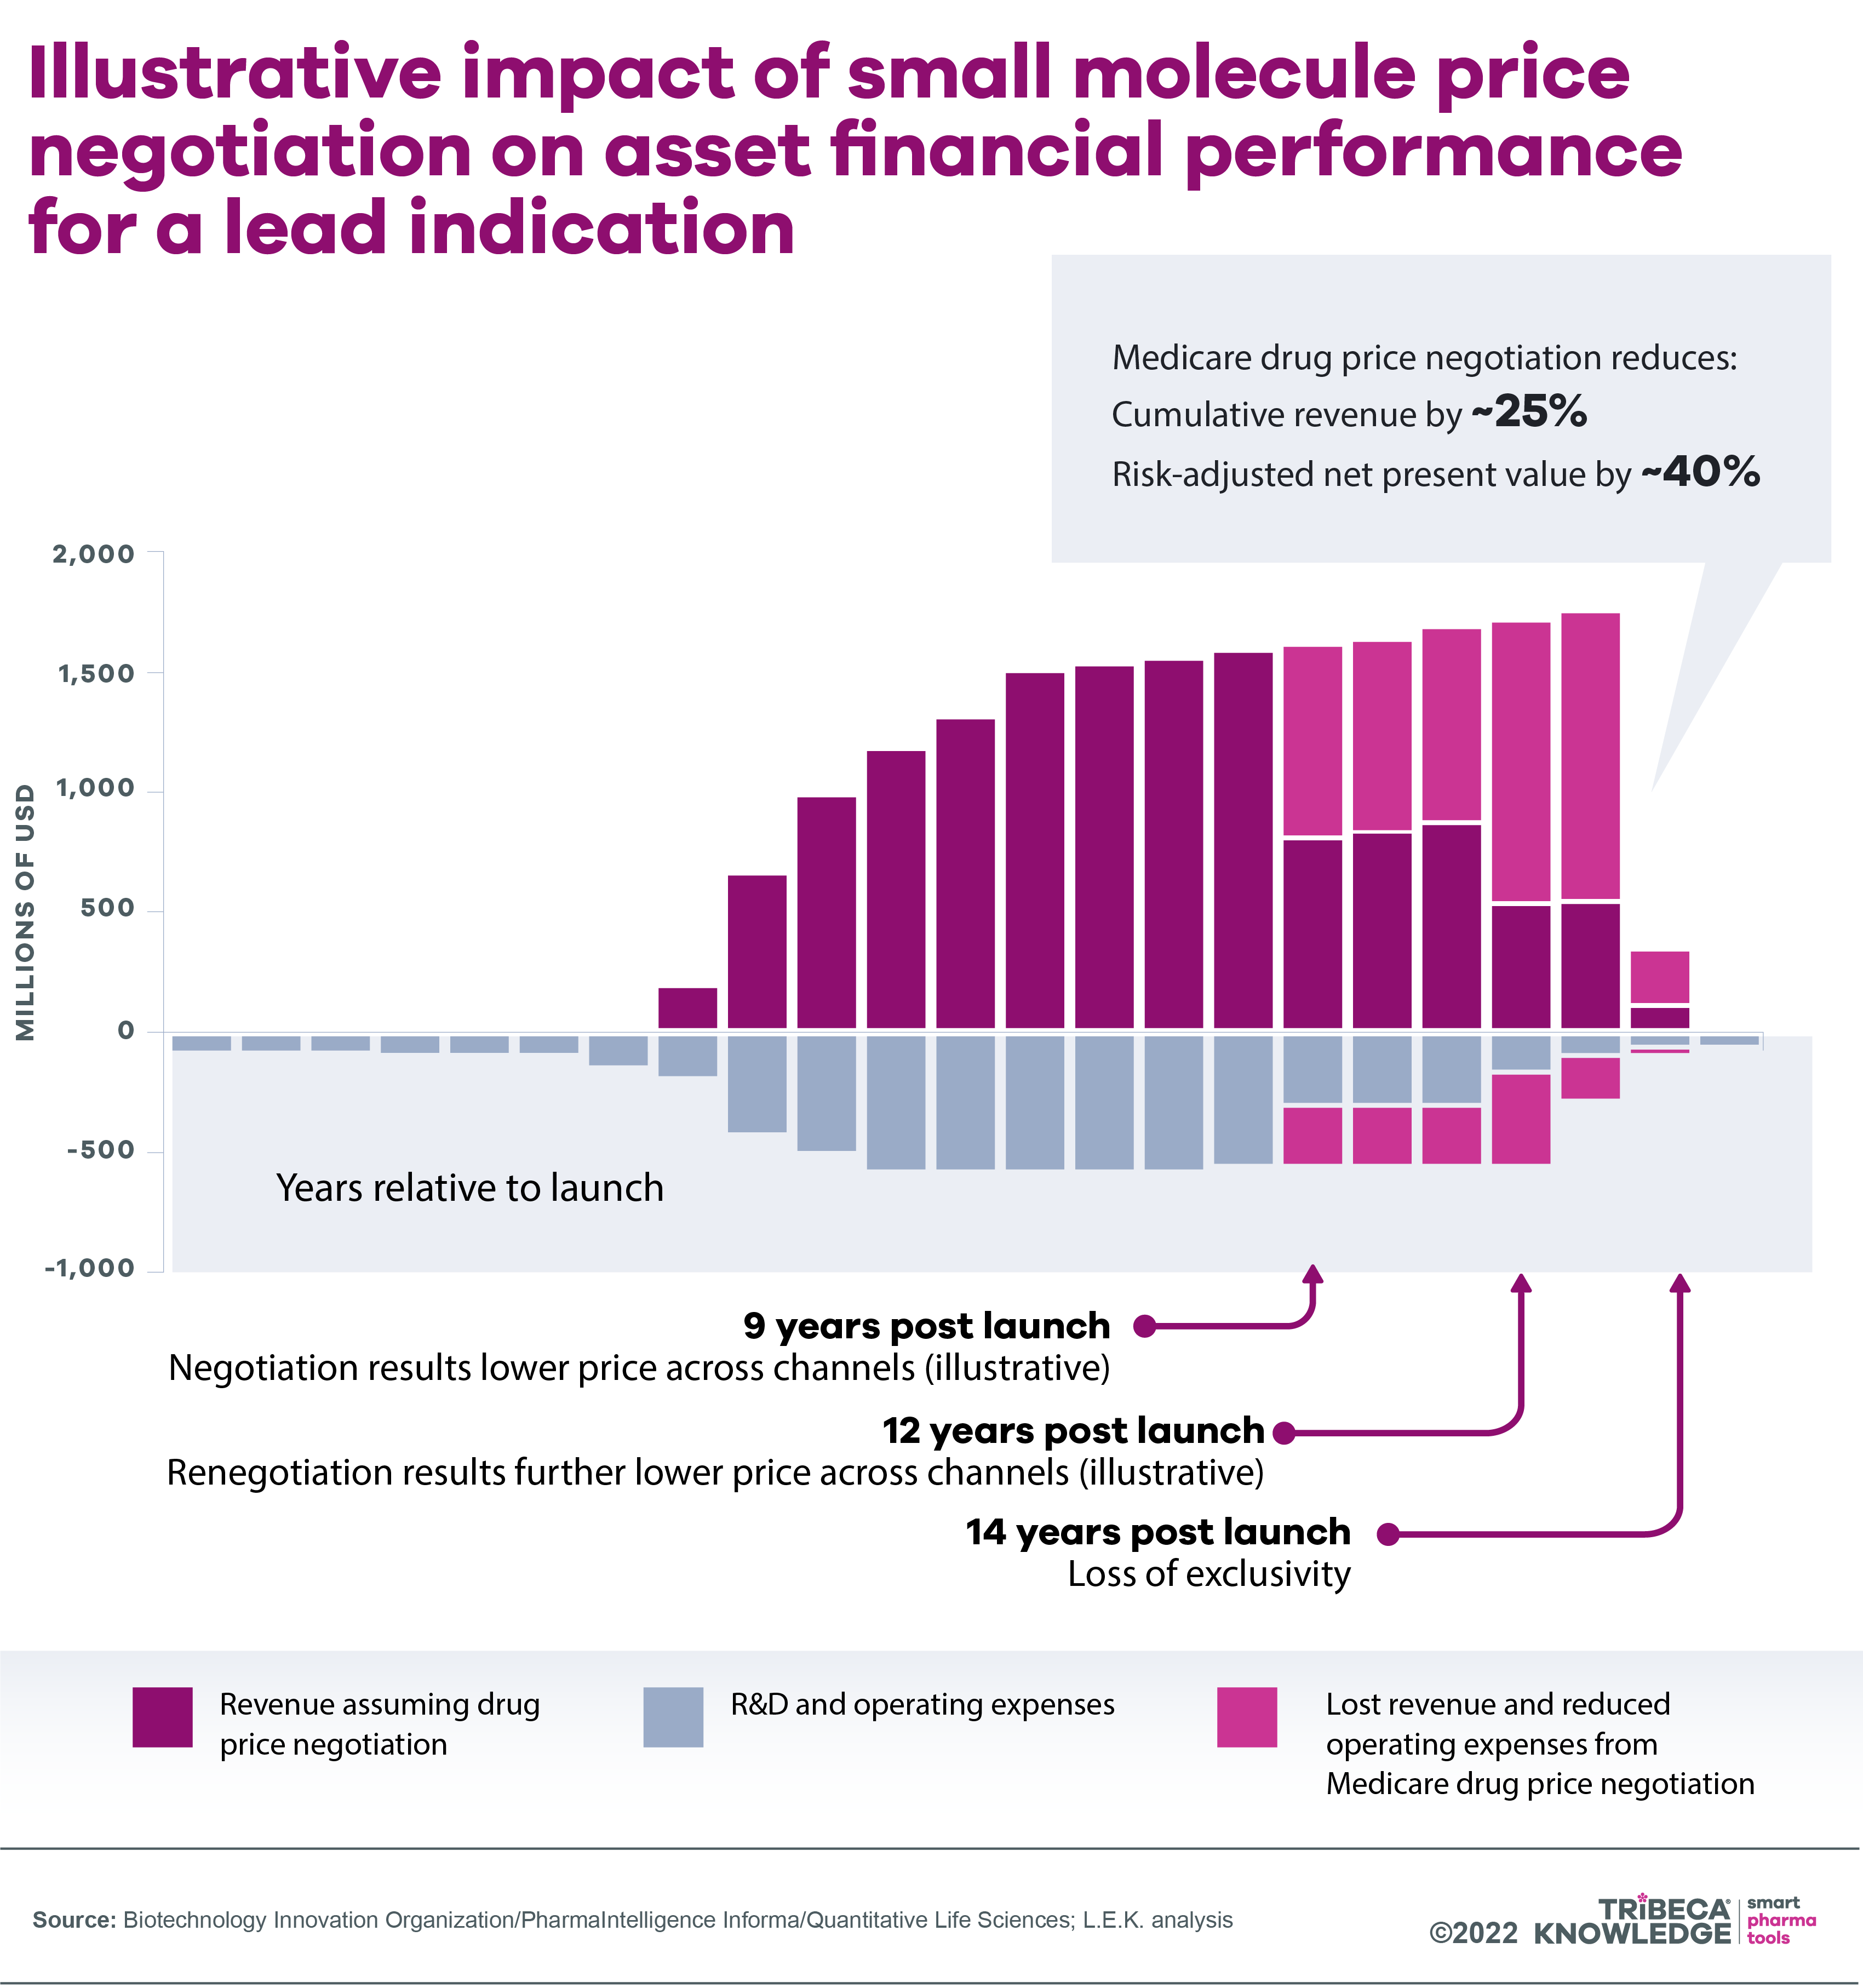 Graphic showing illustrative impact of small molecule price negotiation on asset financial performance for a lead indication